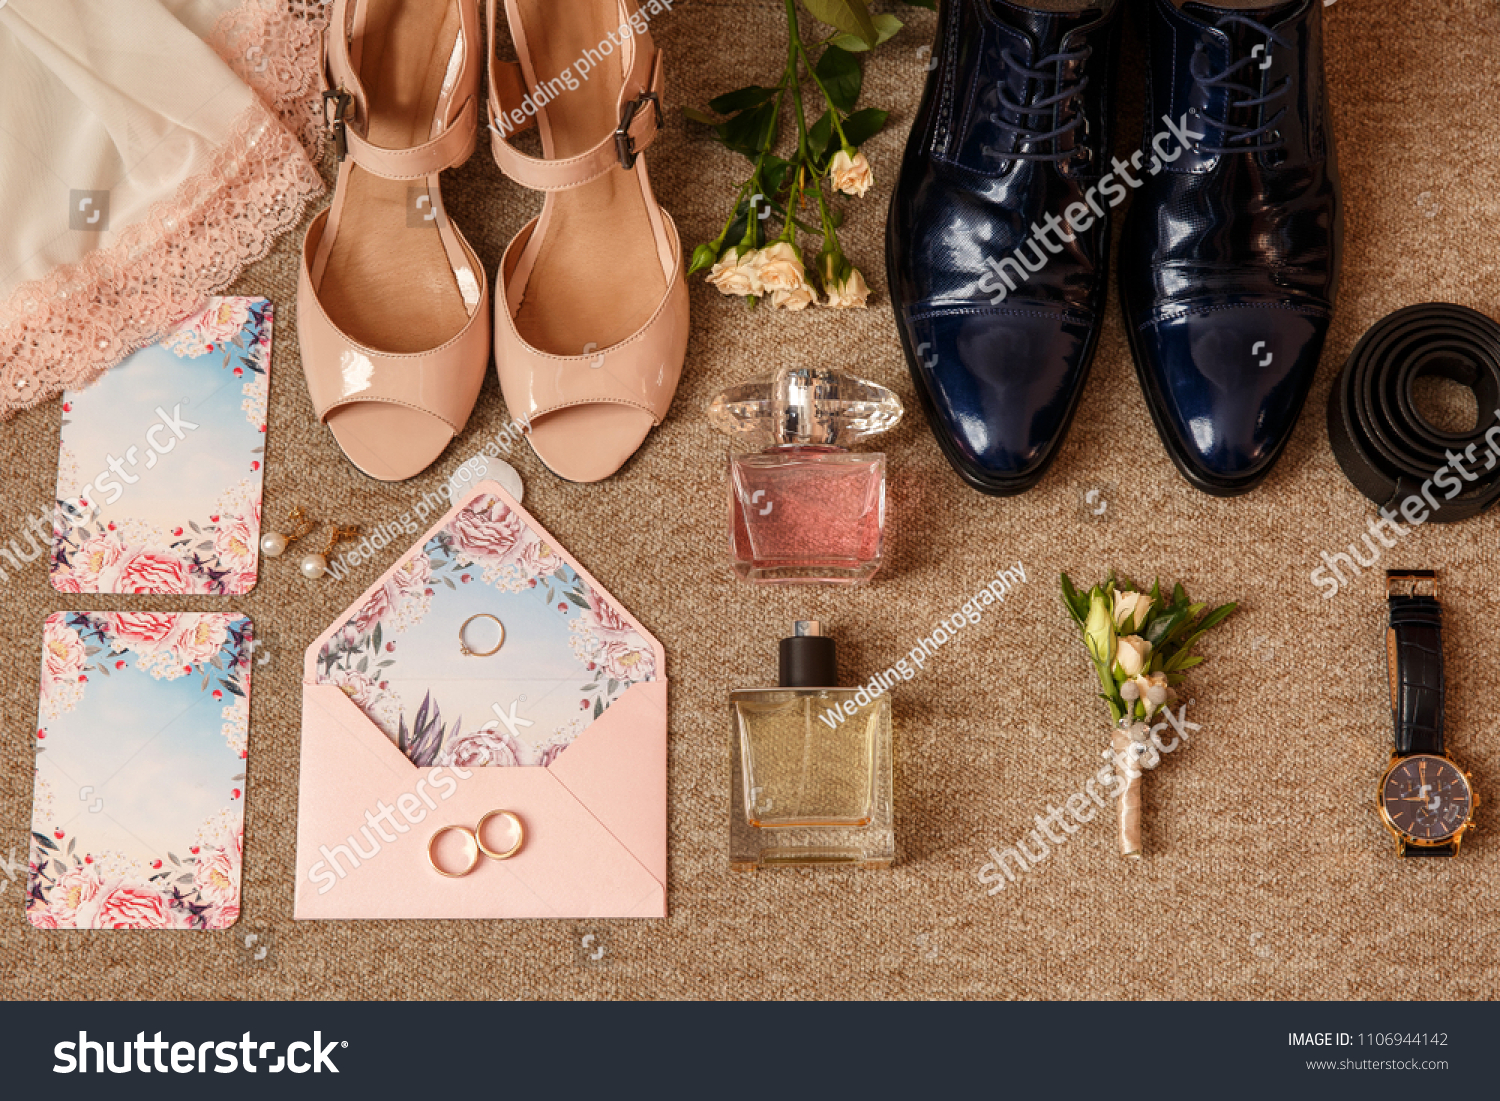 engagement shoes for groom